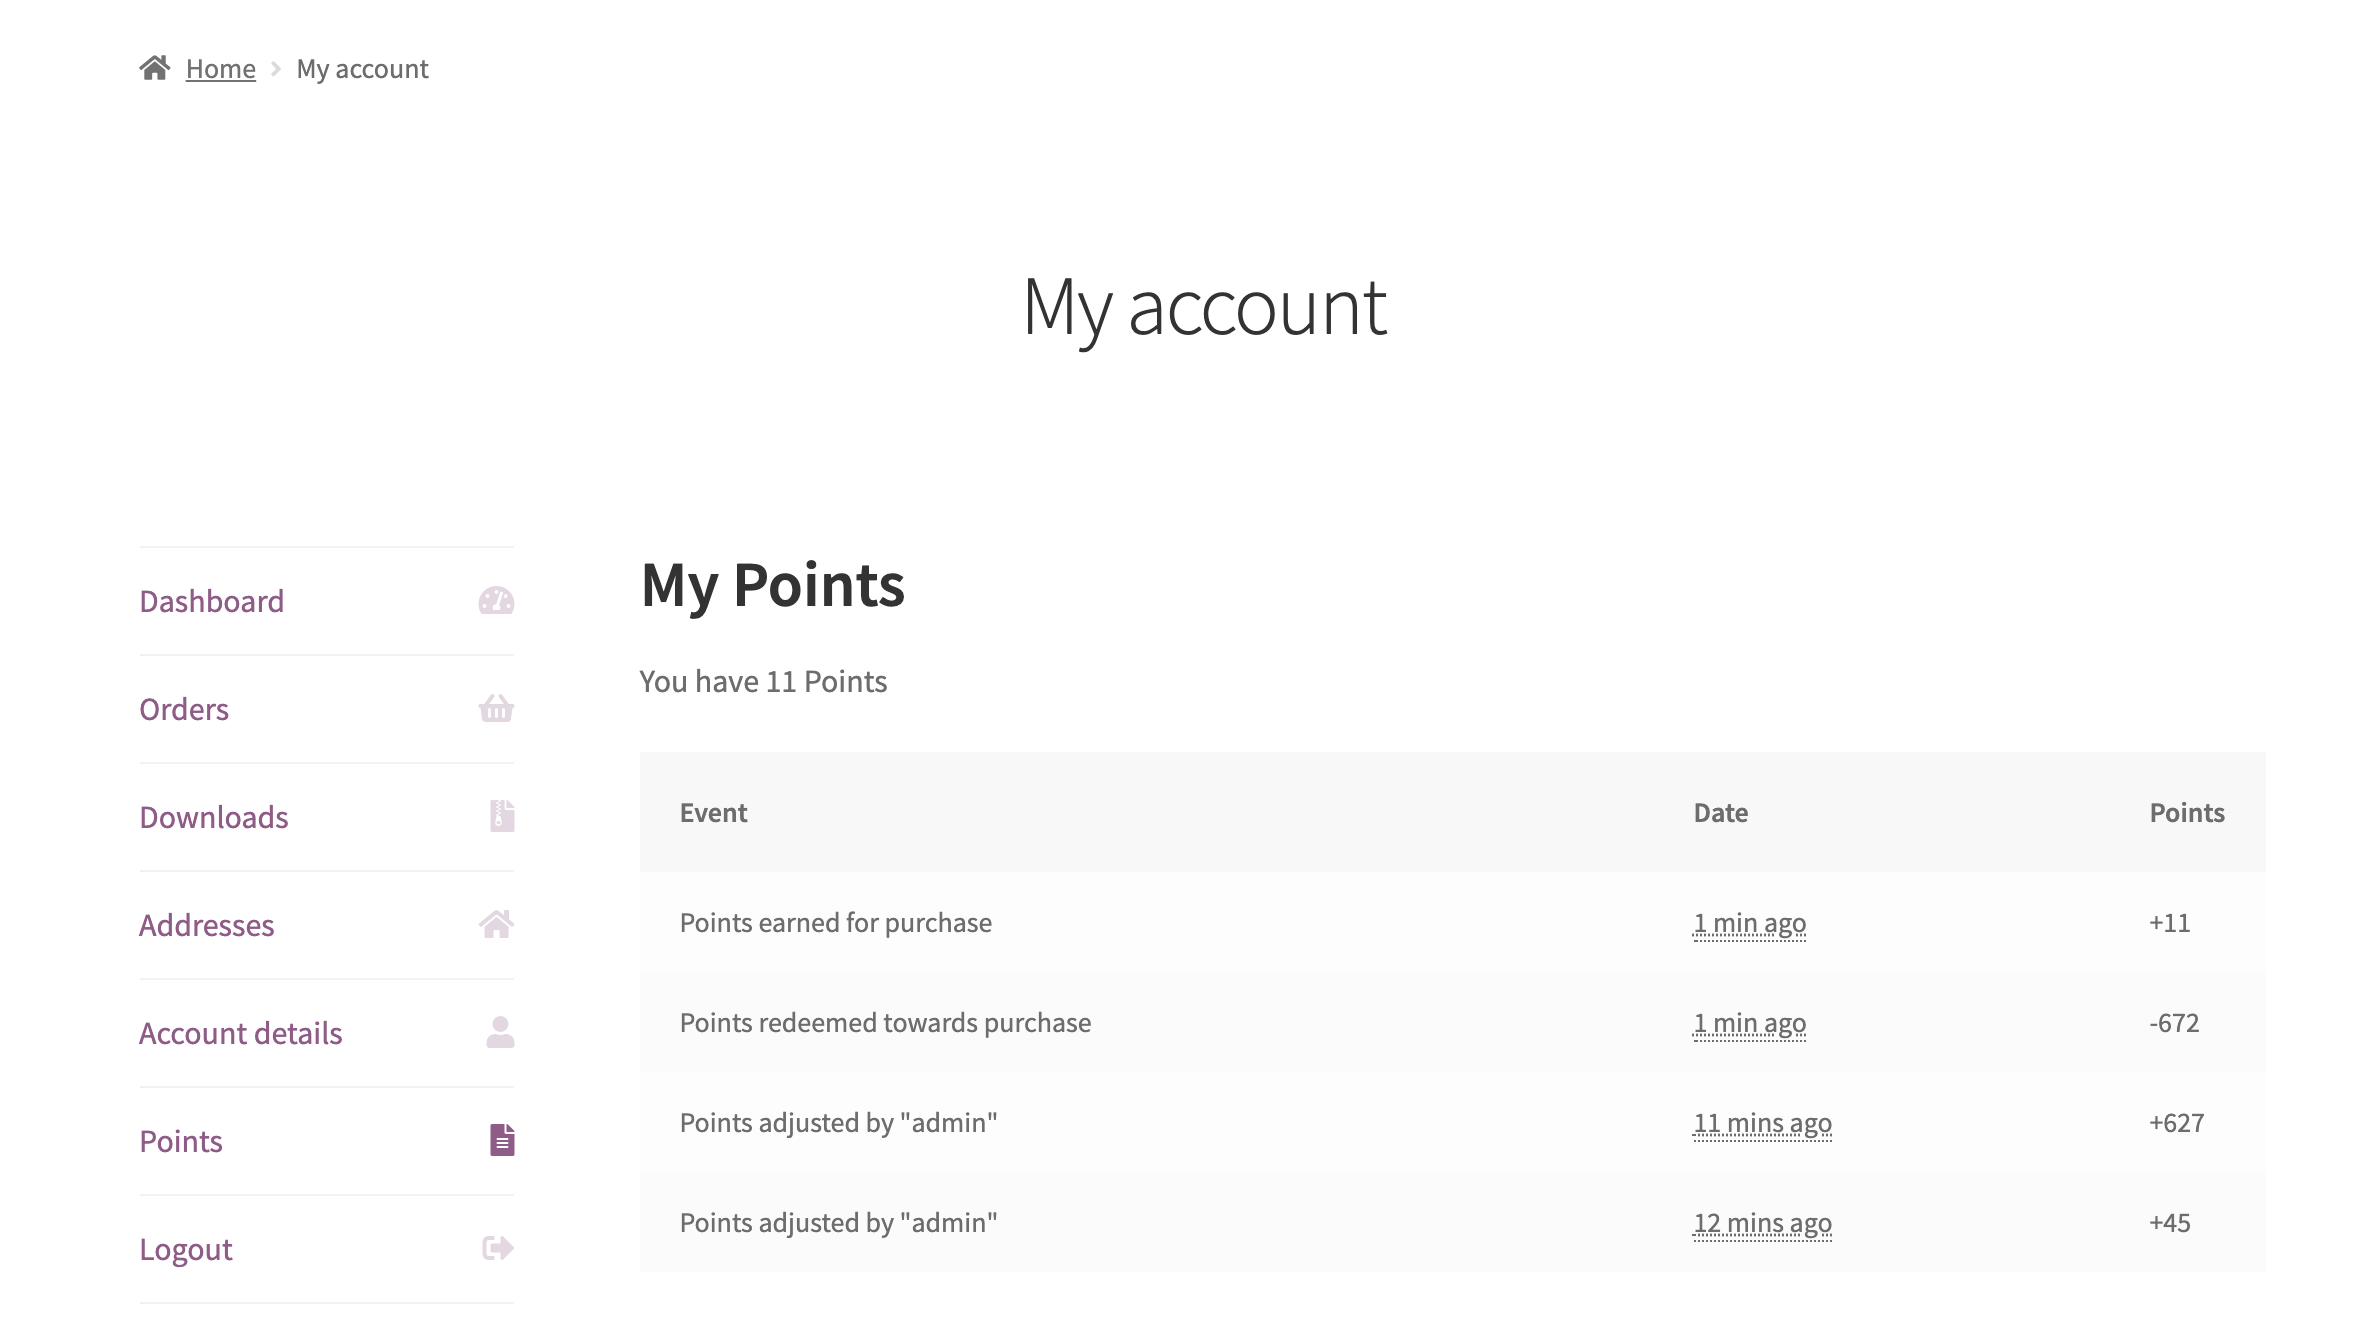 Show customers their points history on the My Account page